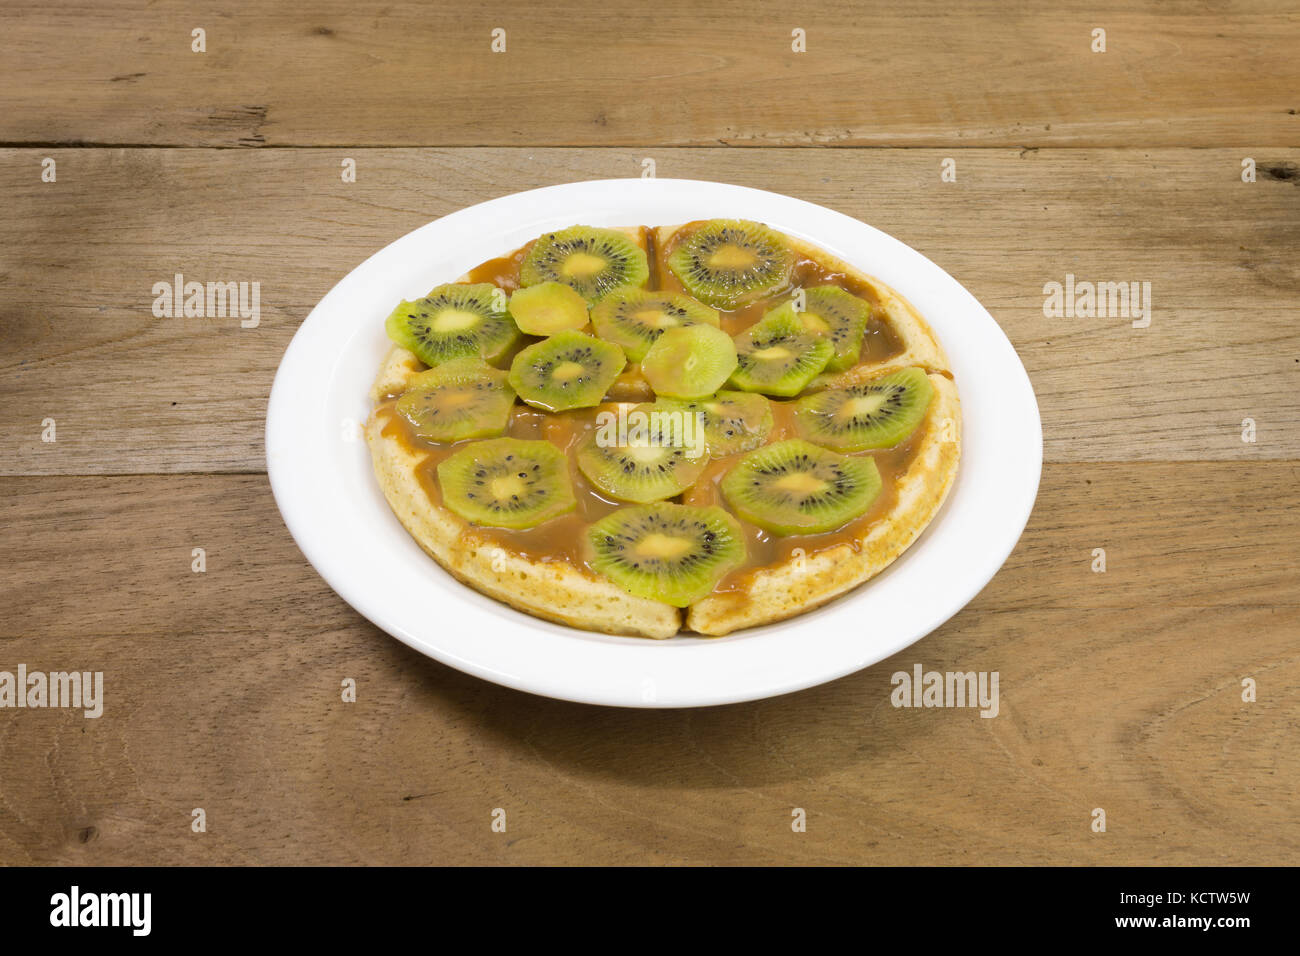 Waffle with milk caramel spread (Spanish: Dulce de leche) and kiwi fruit slices on white plate, on wooden background Stock Photo